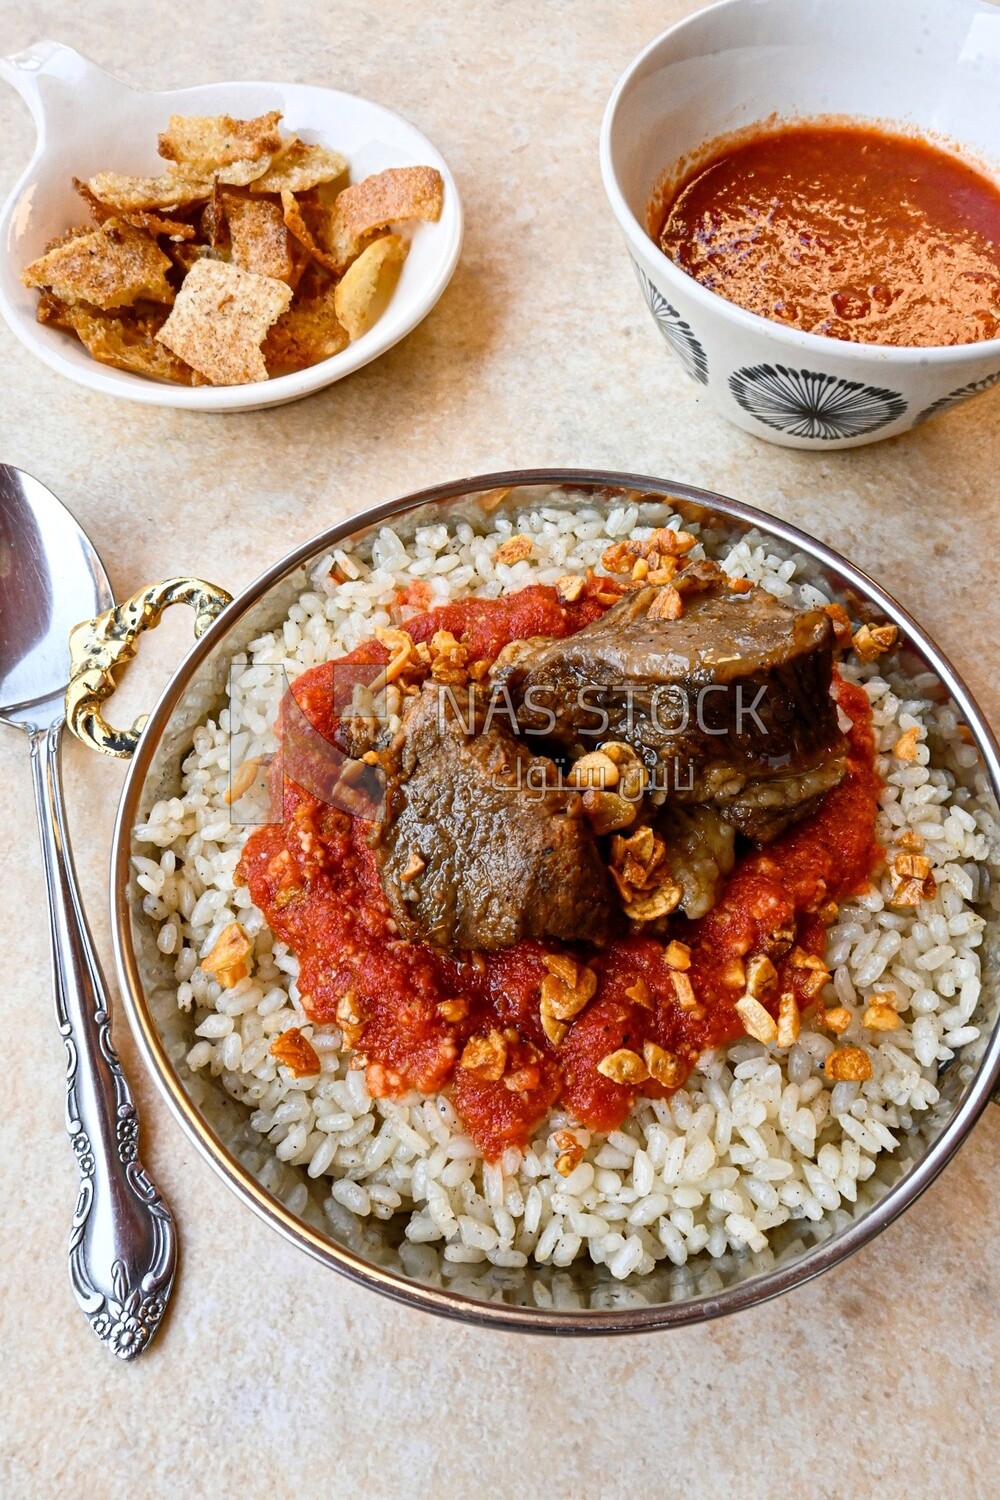 Egyptian fattah with meat